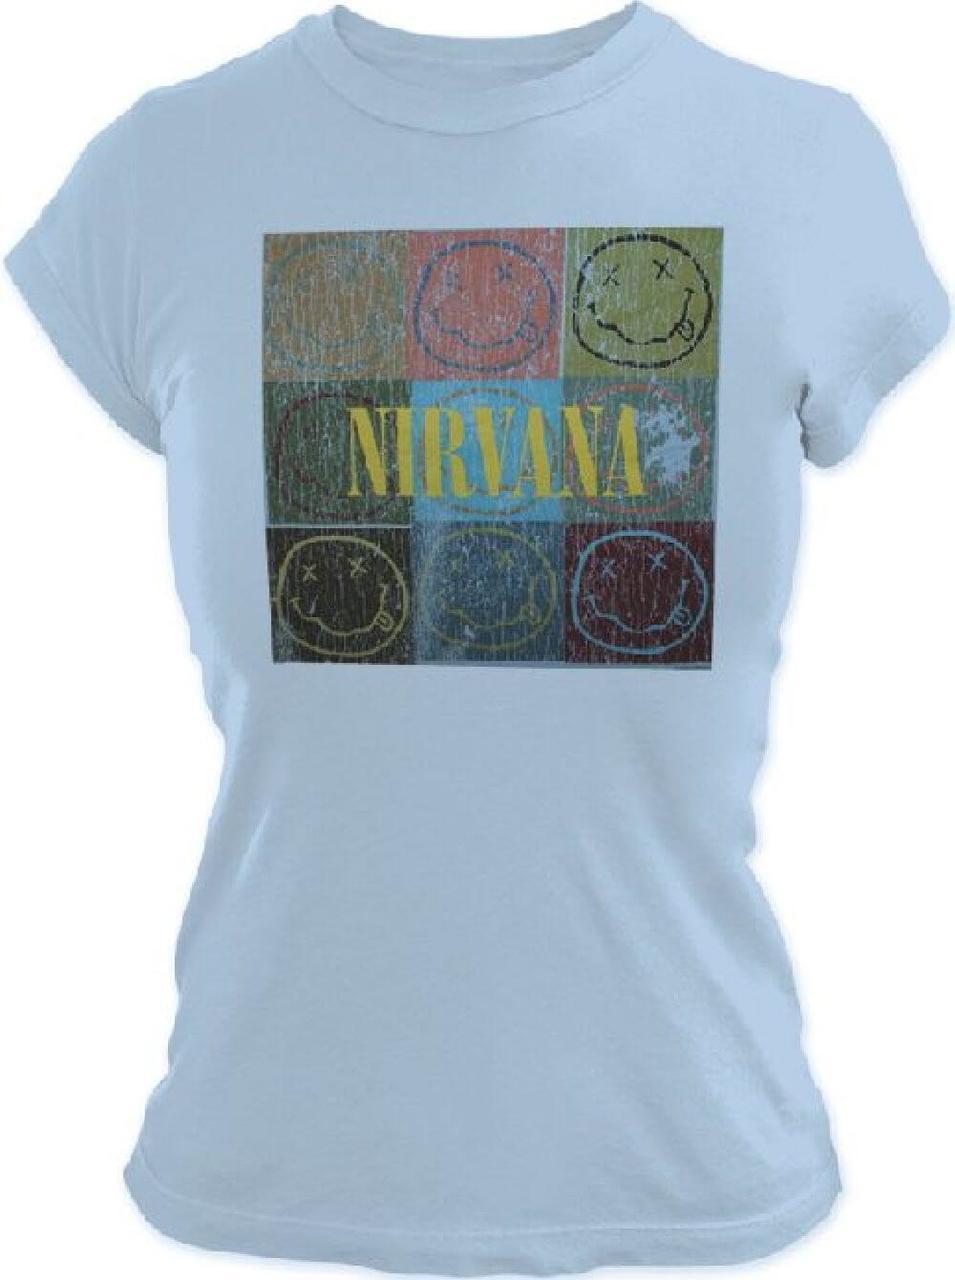 Square with Faces Logo - Nirvana Smiley Face Logo in Colored Boxes Women's Blue T-shirt ...